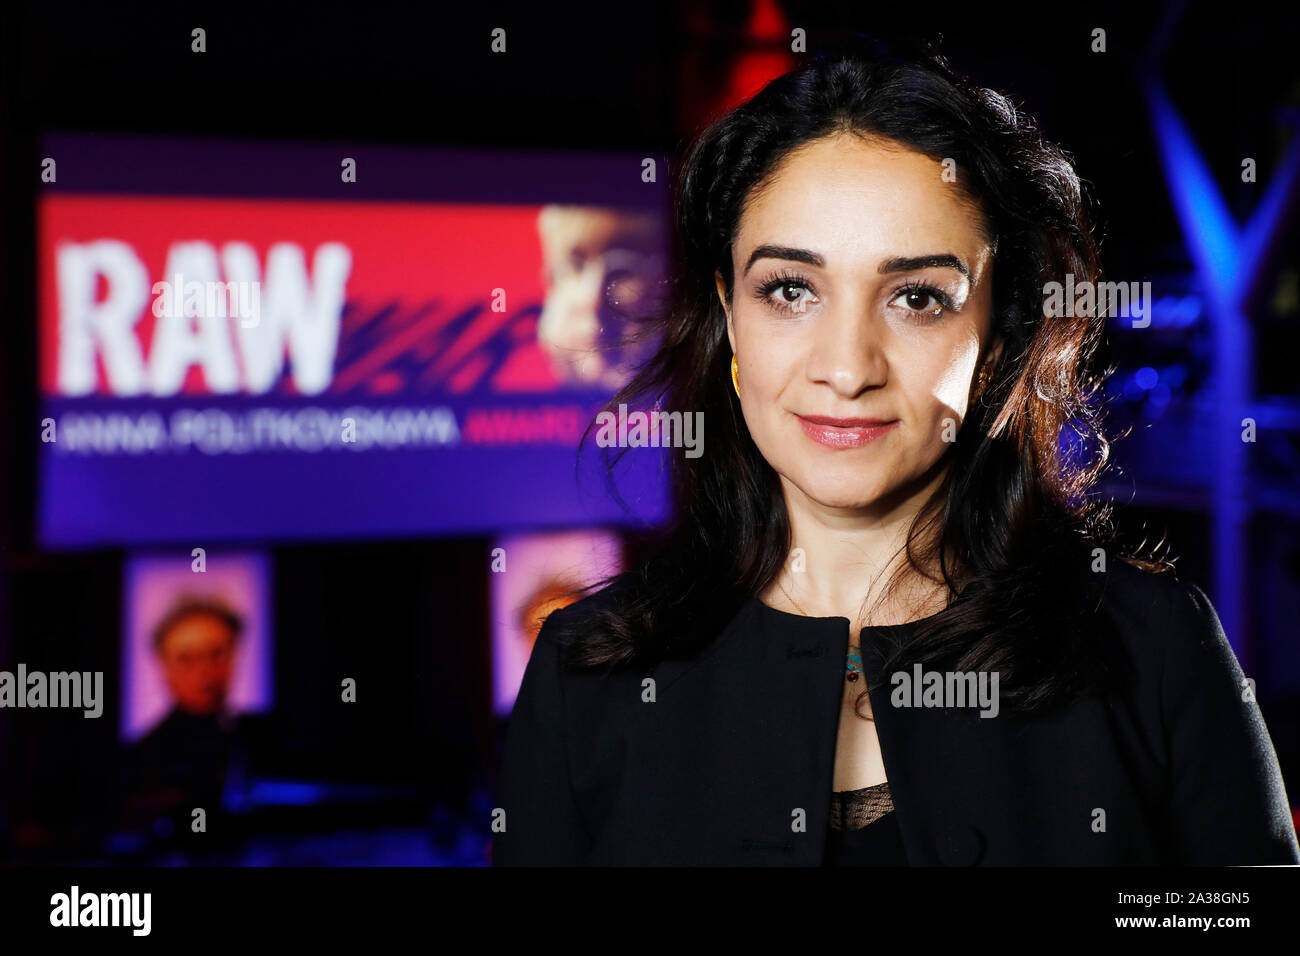 London, UK. 5th Oct, 2019.Lawyer and human rights activist Leila Alikarami poses for photographs before the RAW in WAR Anna Politkovskaya Award 2018, at a ceremony in London Saturday October 5. Alexievich received the award for speaking out about injustices in the post-Soviet space. The award in memory of journalist Anna Polikotkovskaya who was murdered in 2006 is presented annually, by the Reach All Women in WAR (RAW in WAR) charity to a female human rights defender from a conflict zone. Photograph Credit: Luke MacGregor/Alamy Live News Stock Photo